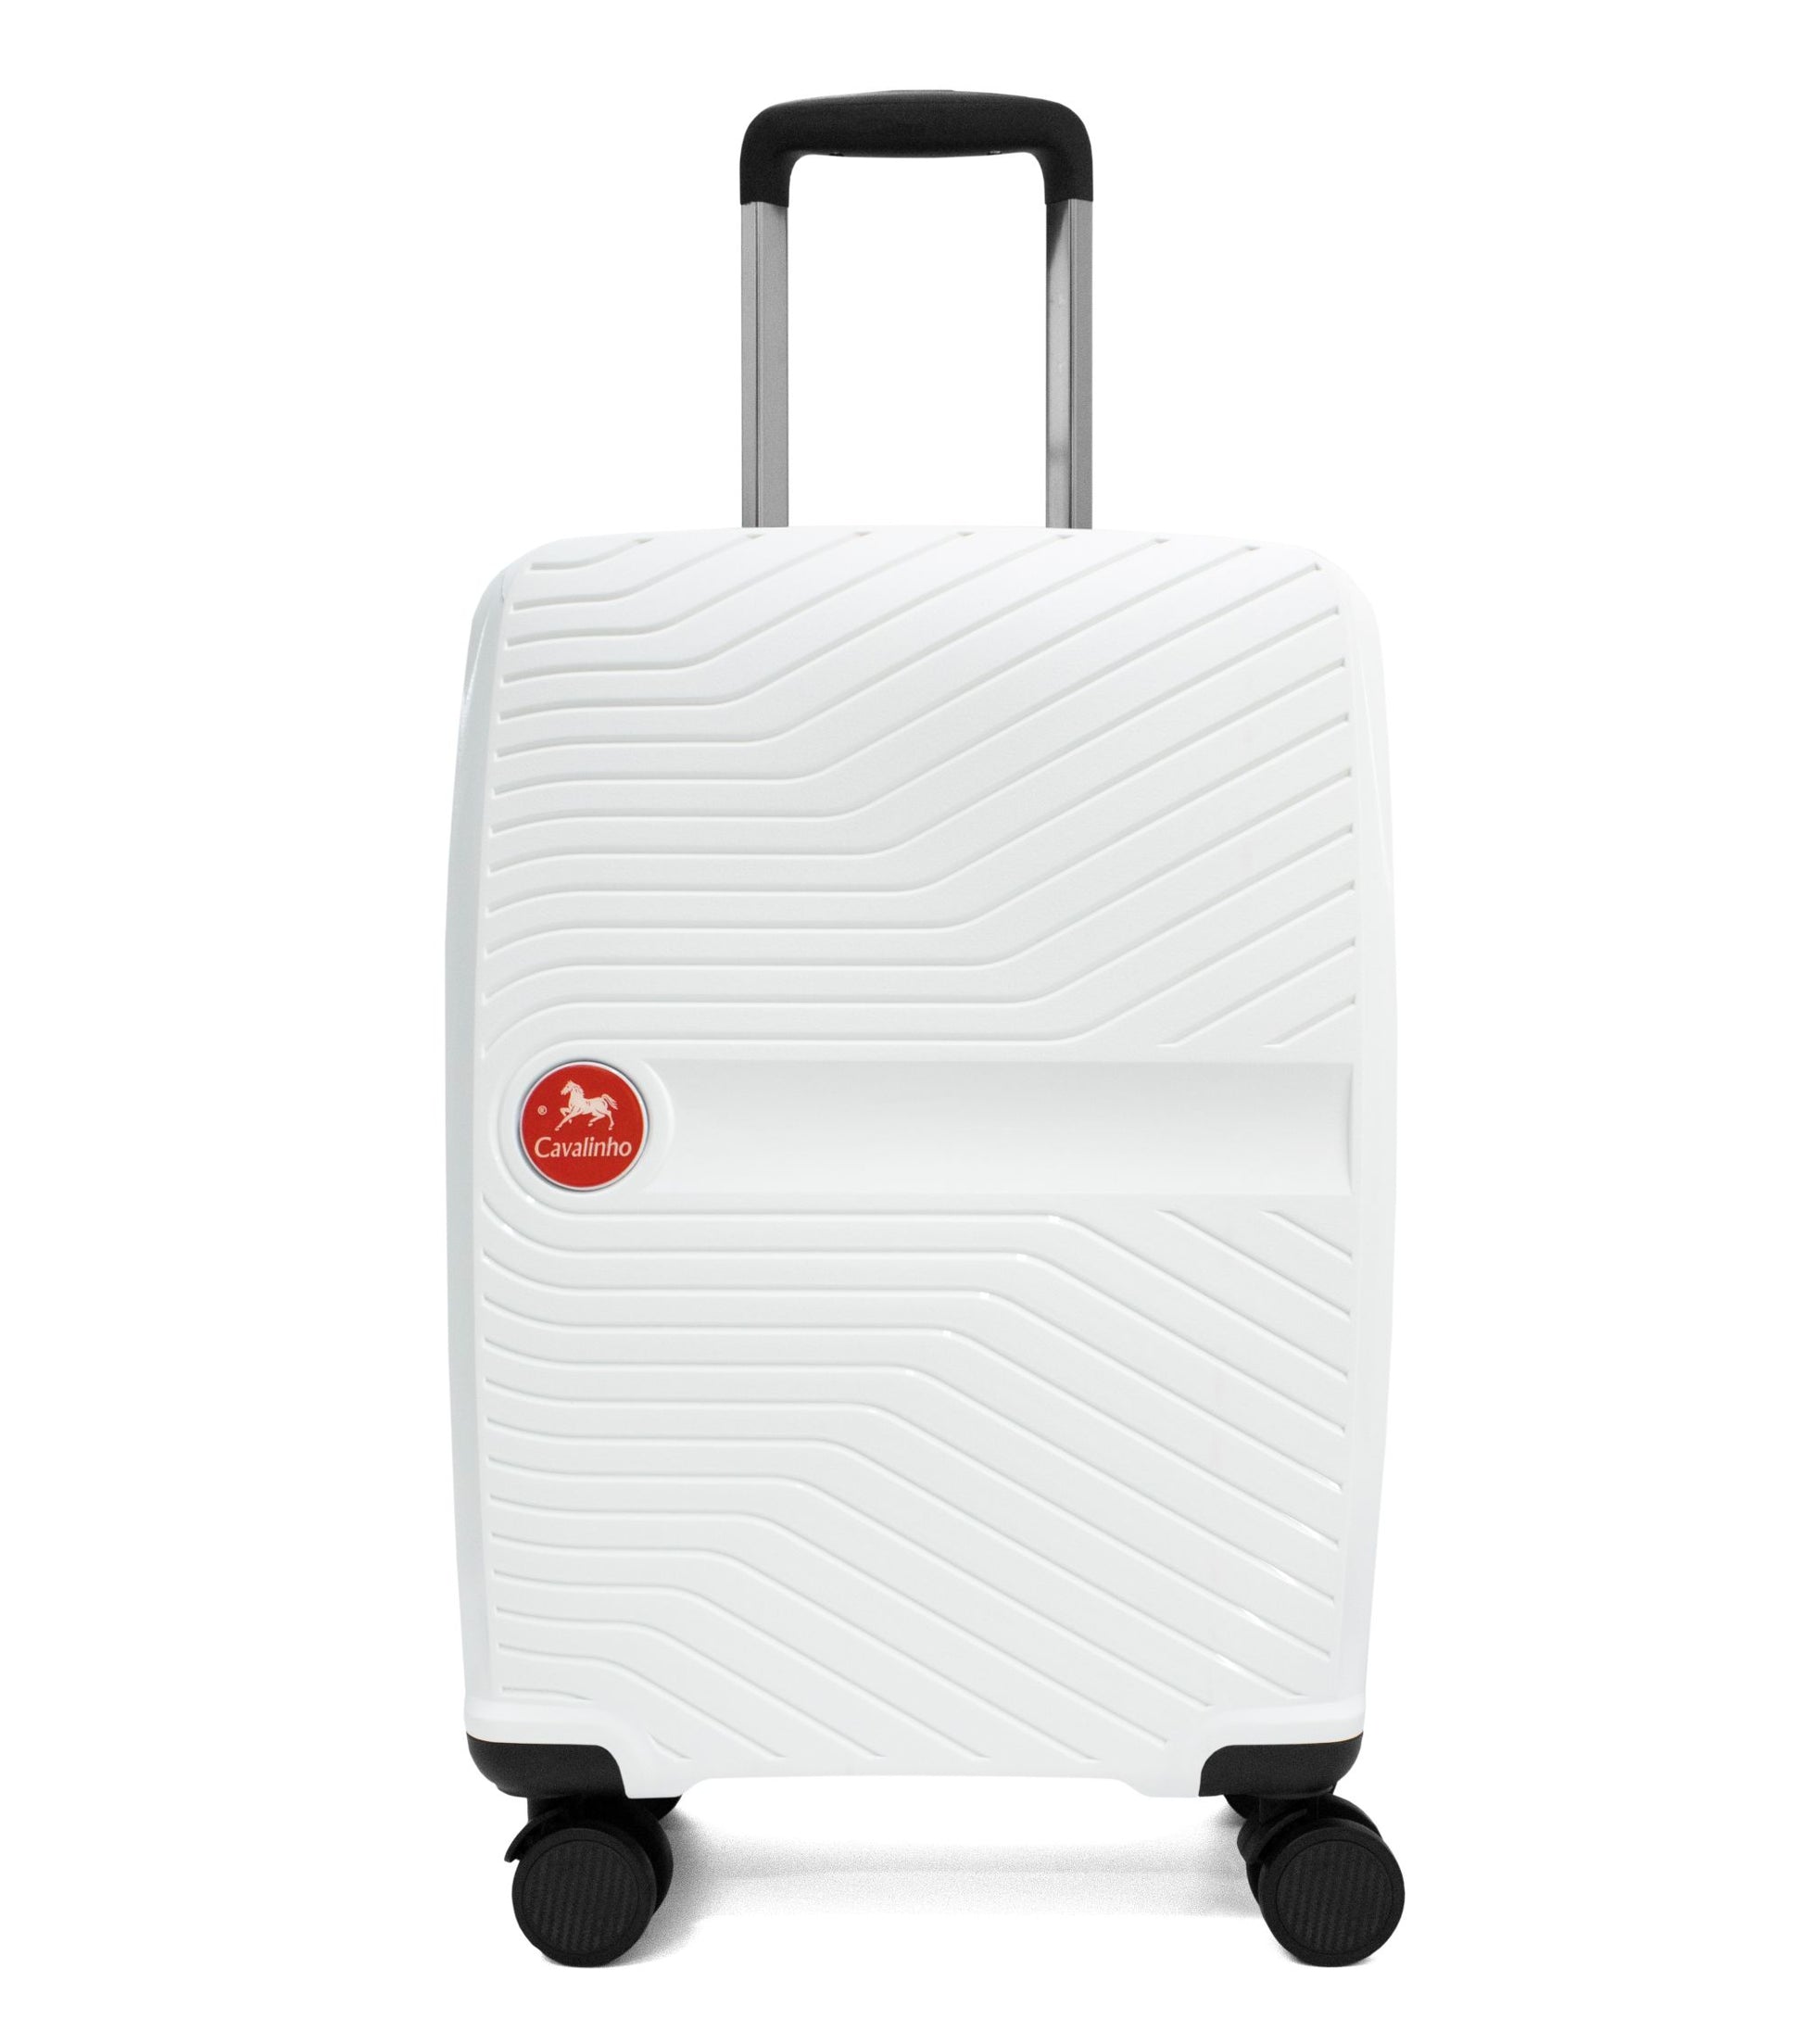 #color_ 19 inch White | Cavalinho Colorful Carry-on Hardside Luggage (19") - 19 inch White - 68020004.06.19_1